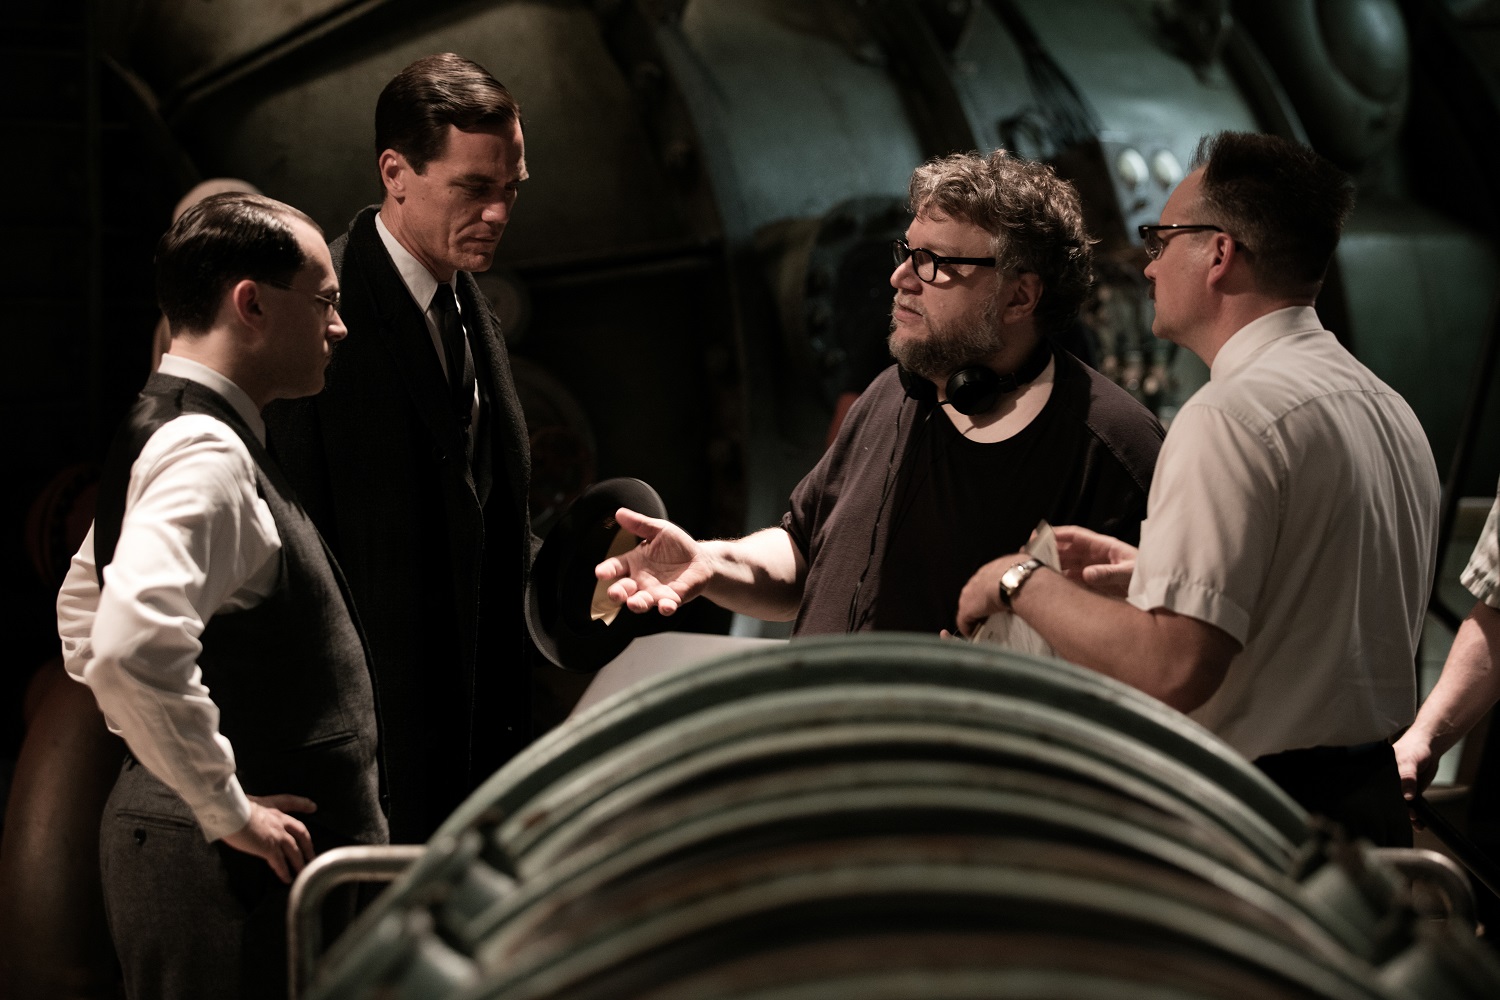 Michael Stuhlbarg, Michael, Shannon, Director/Writer/Producer Guillermo del Toro and David Hewlett on the set of THE SHAPE OF WATER